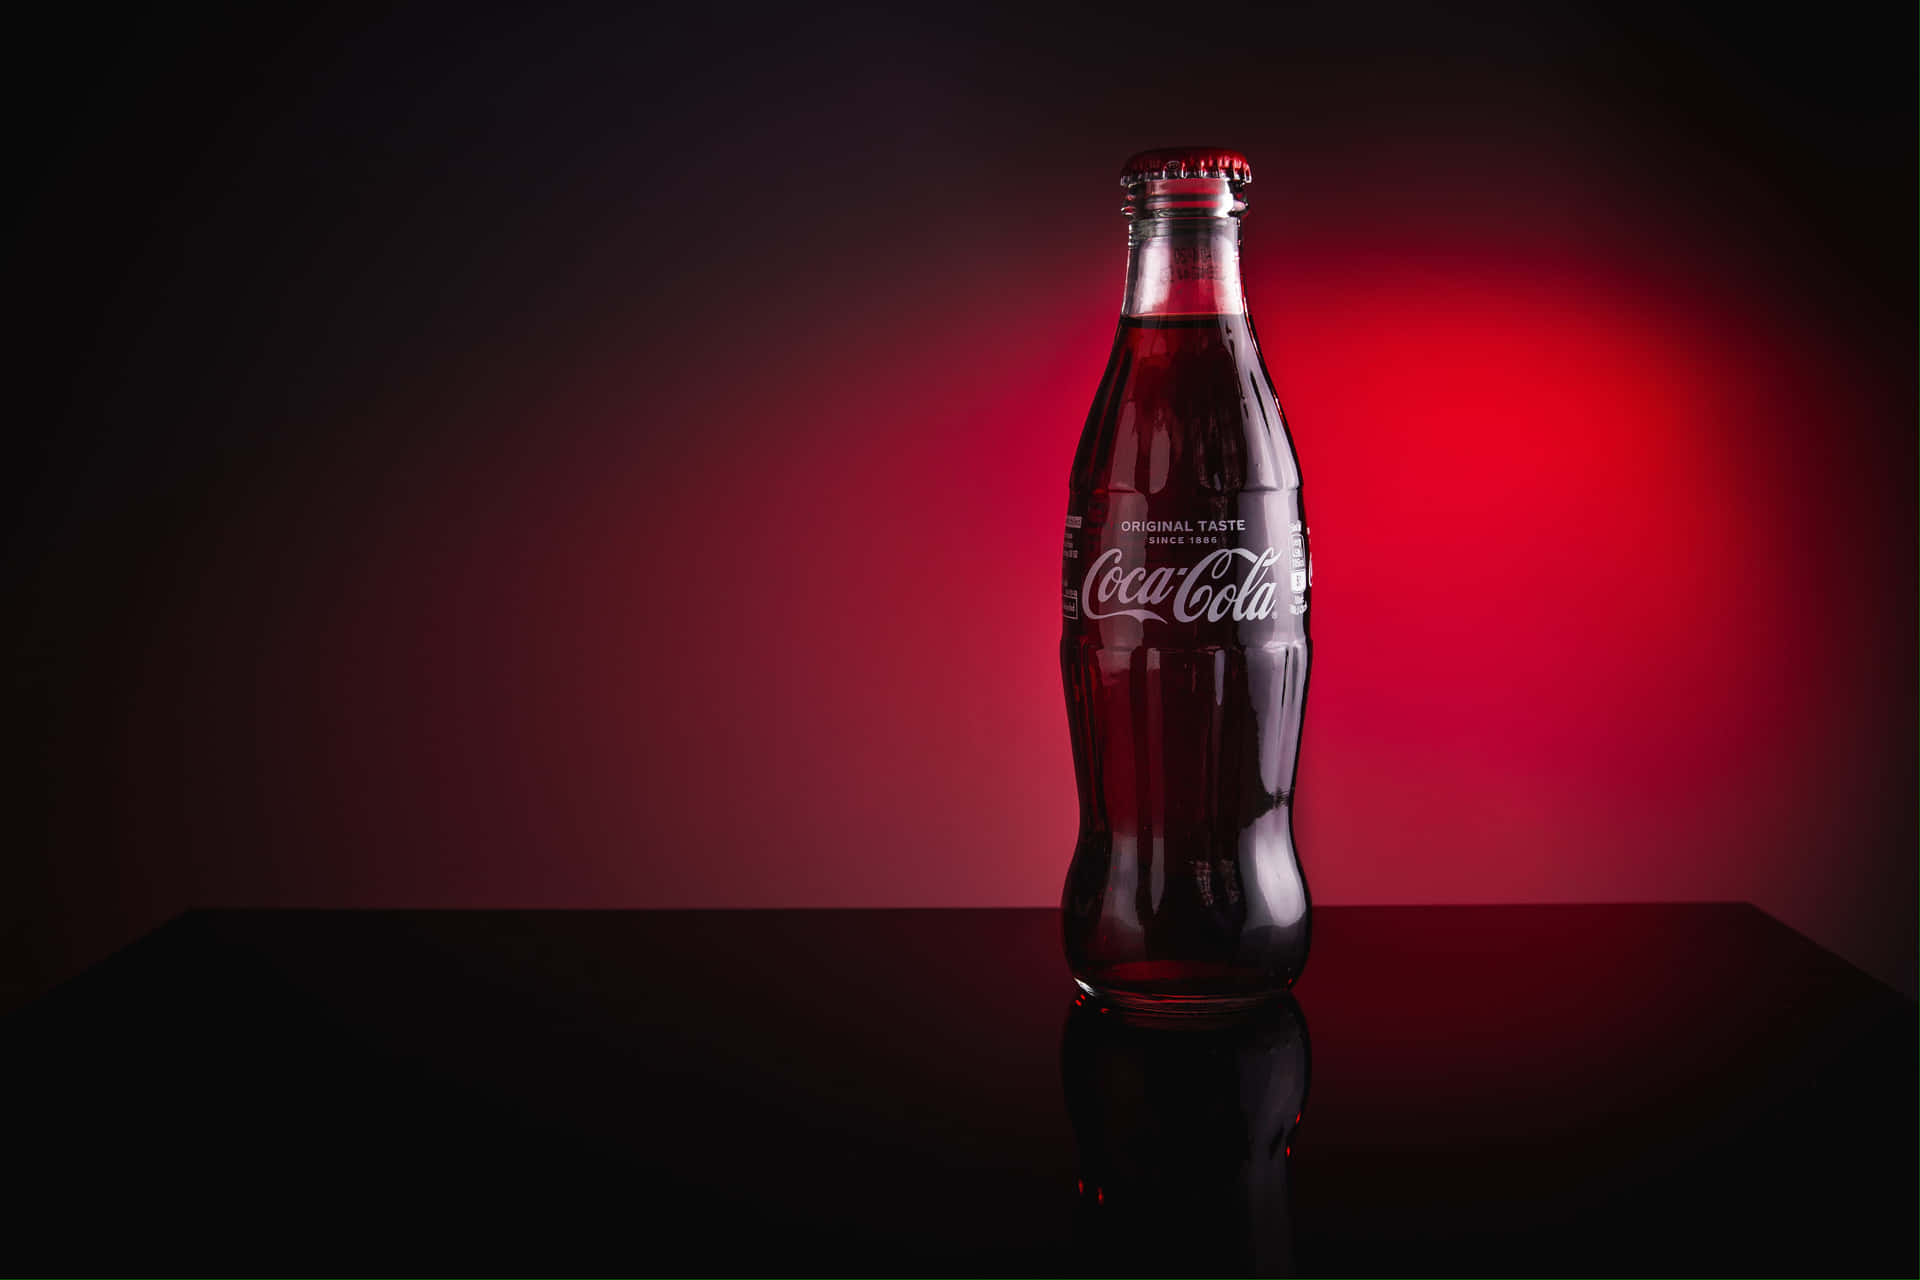 Refresh your palate with a tall, cold glass of Coca-Cola